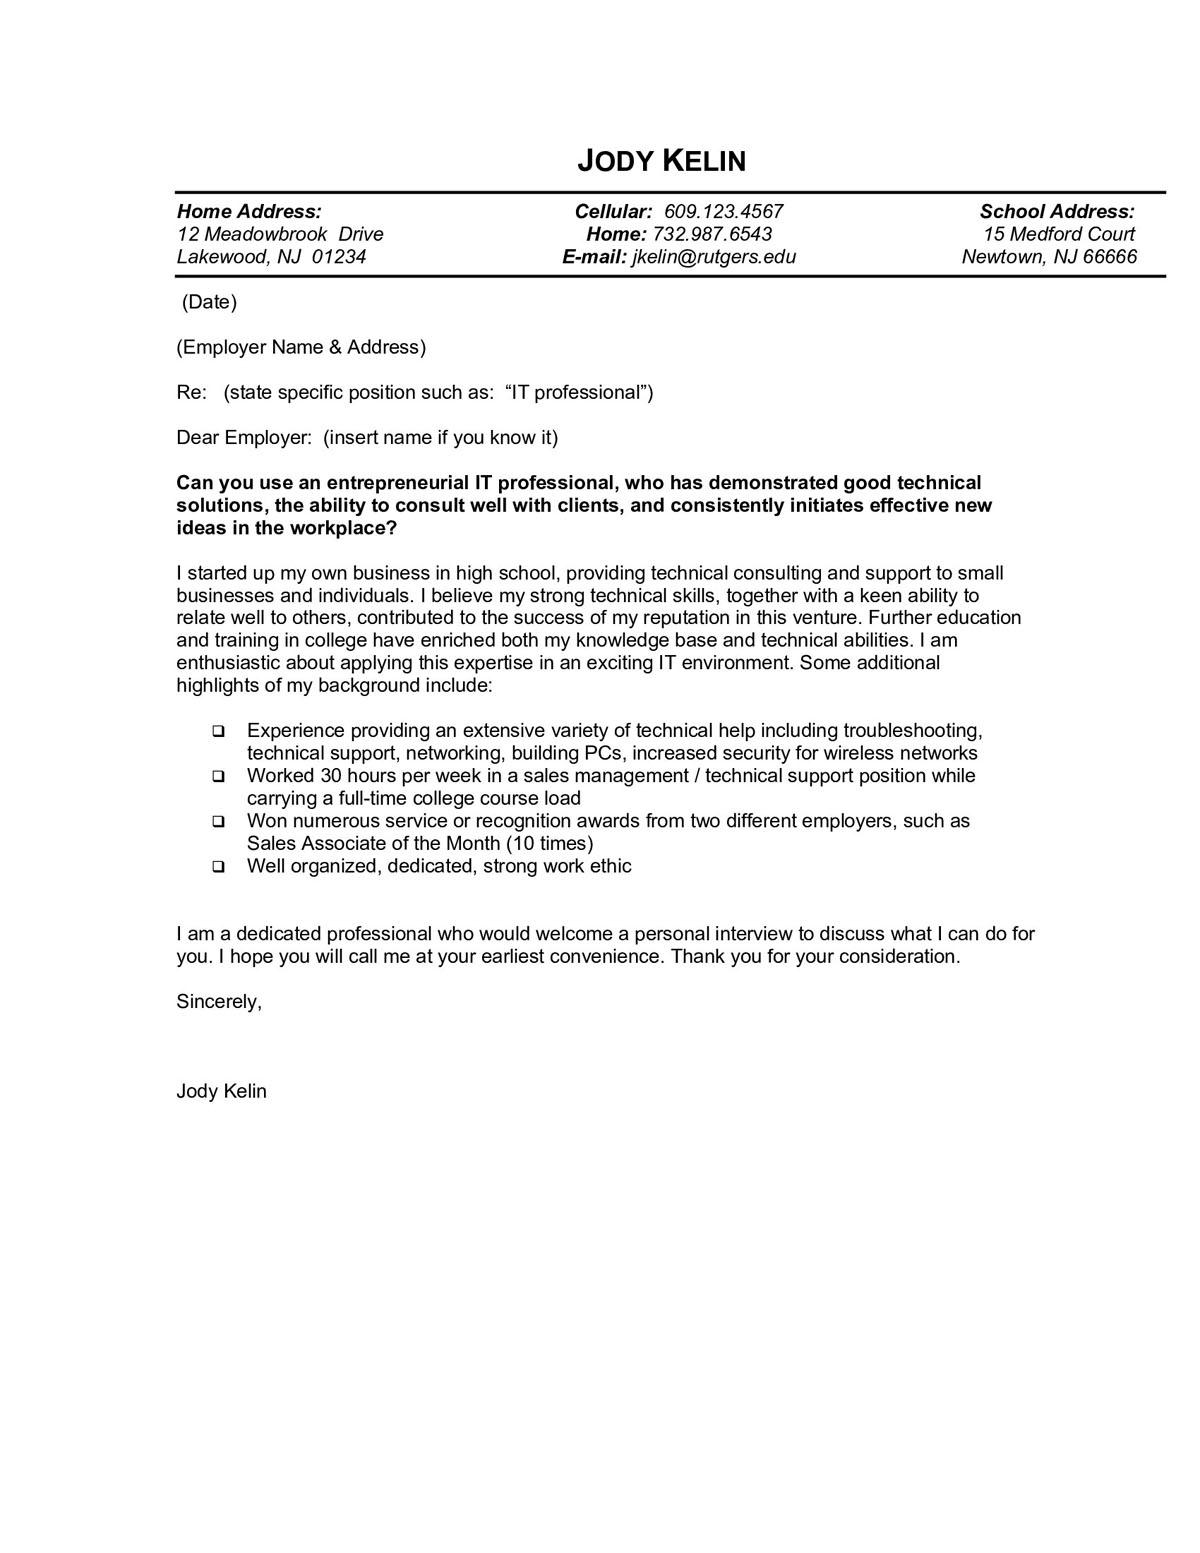 Sample cover letter: Information Technology, Entry Level, Direct Mail